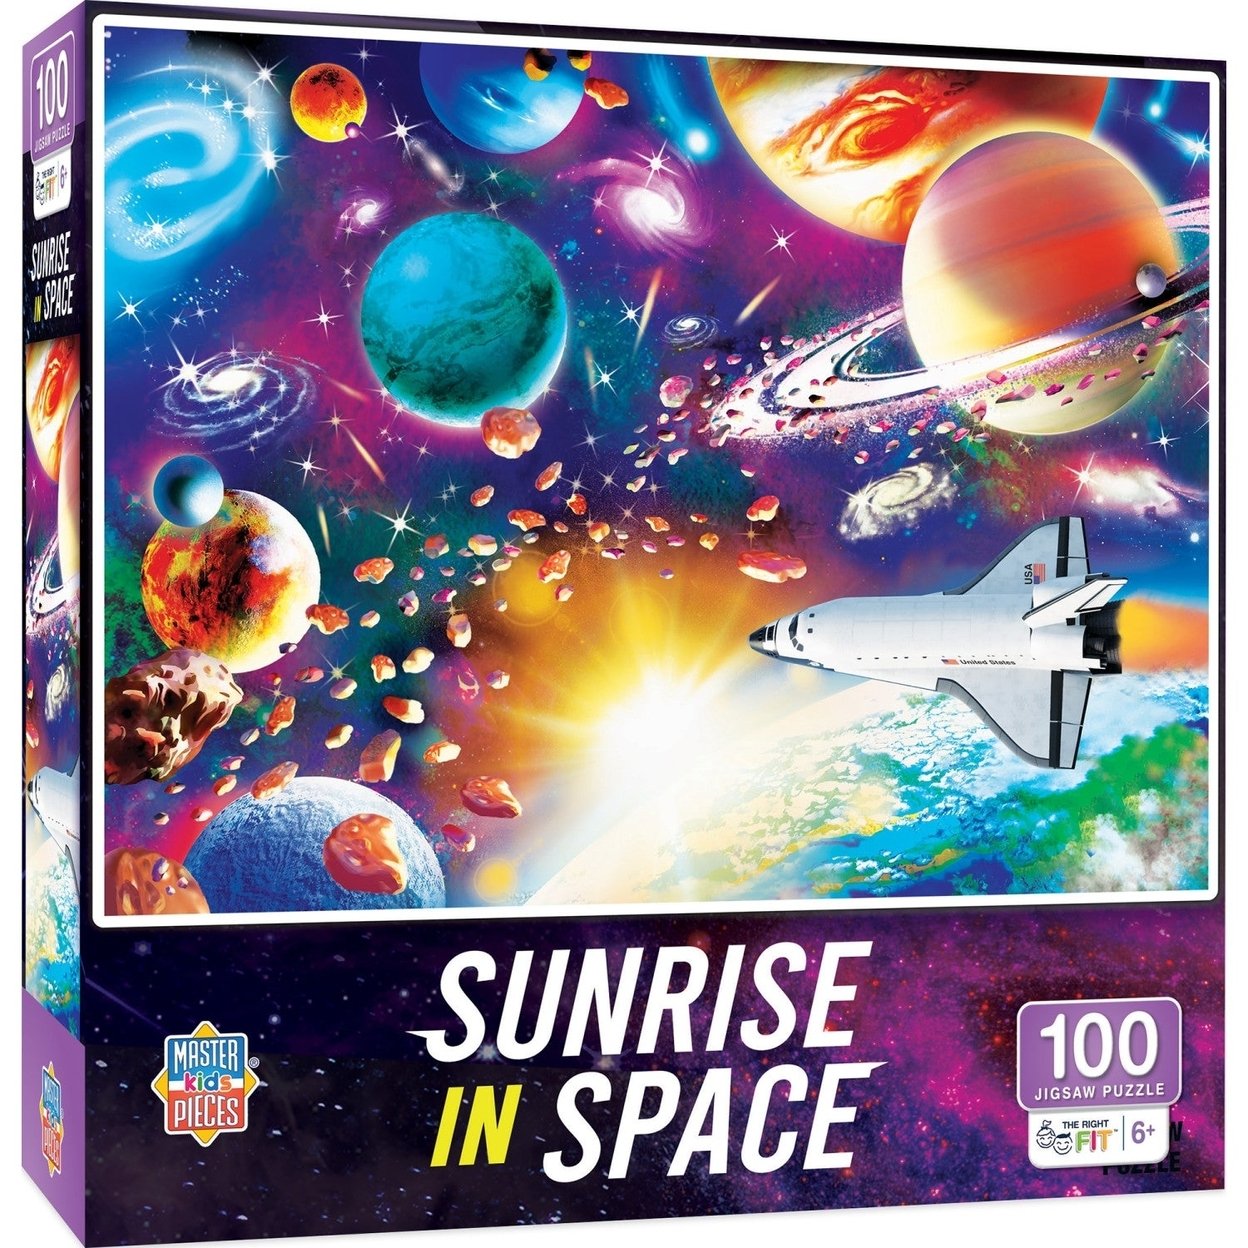 MasterPieces Sunrise in Space 100 Piece Jigsaw Puzzle